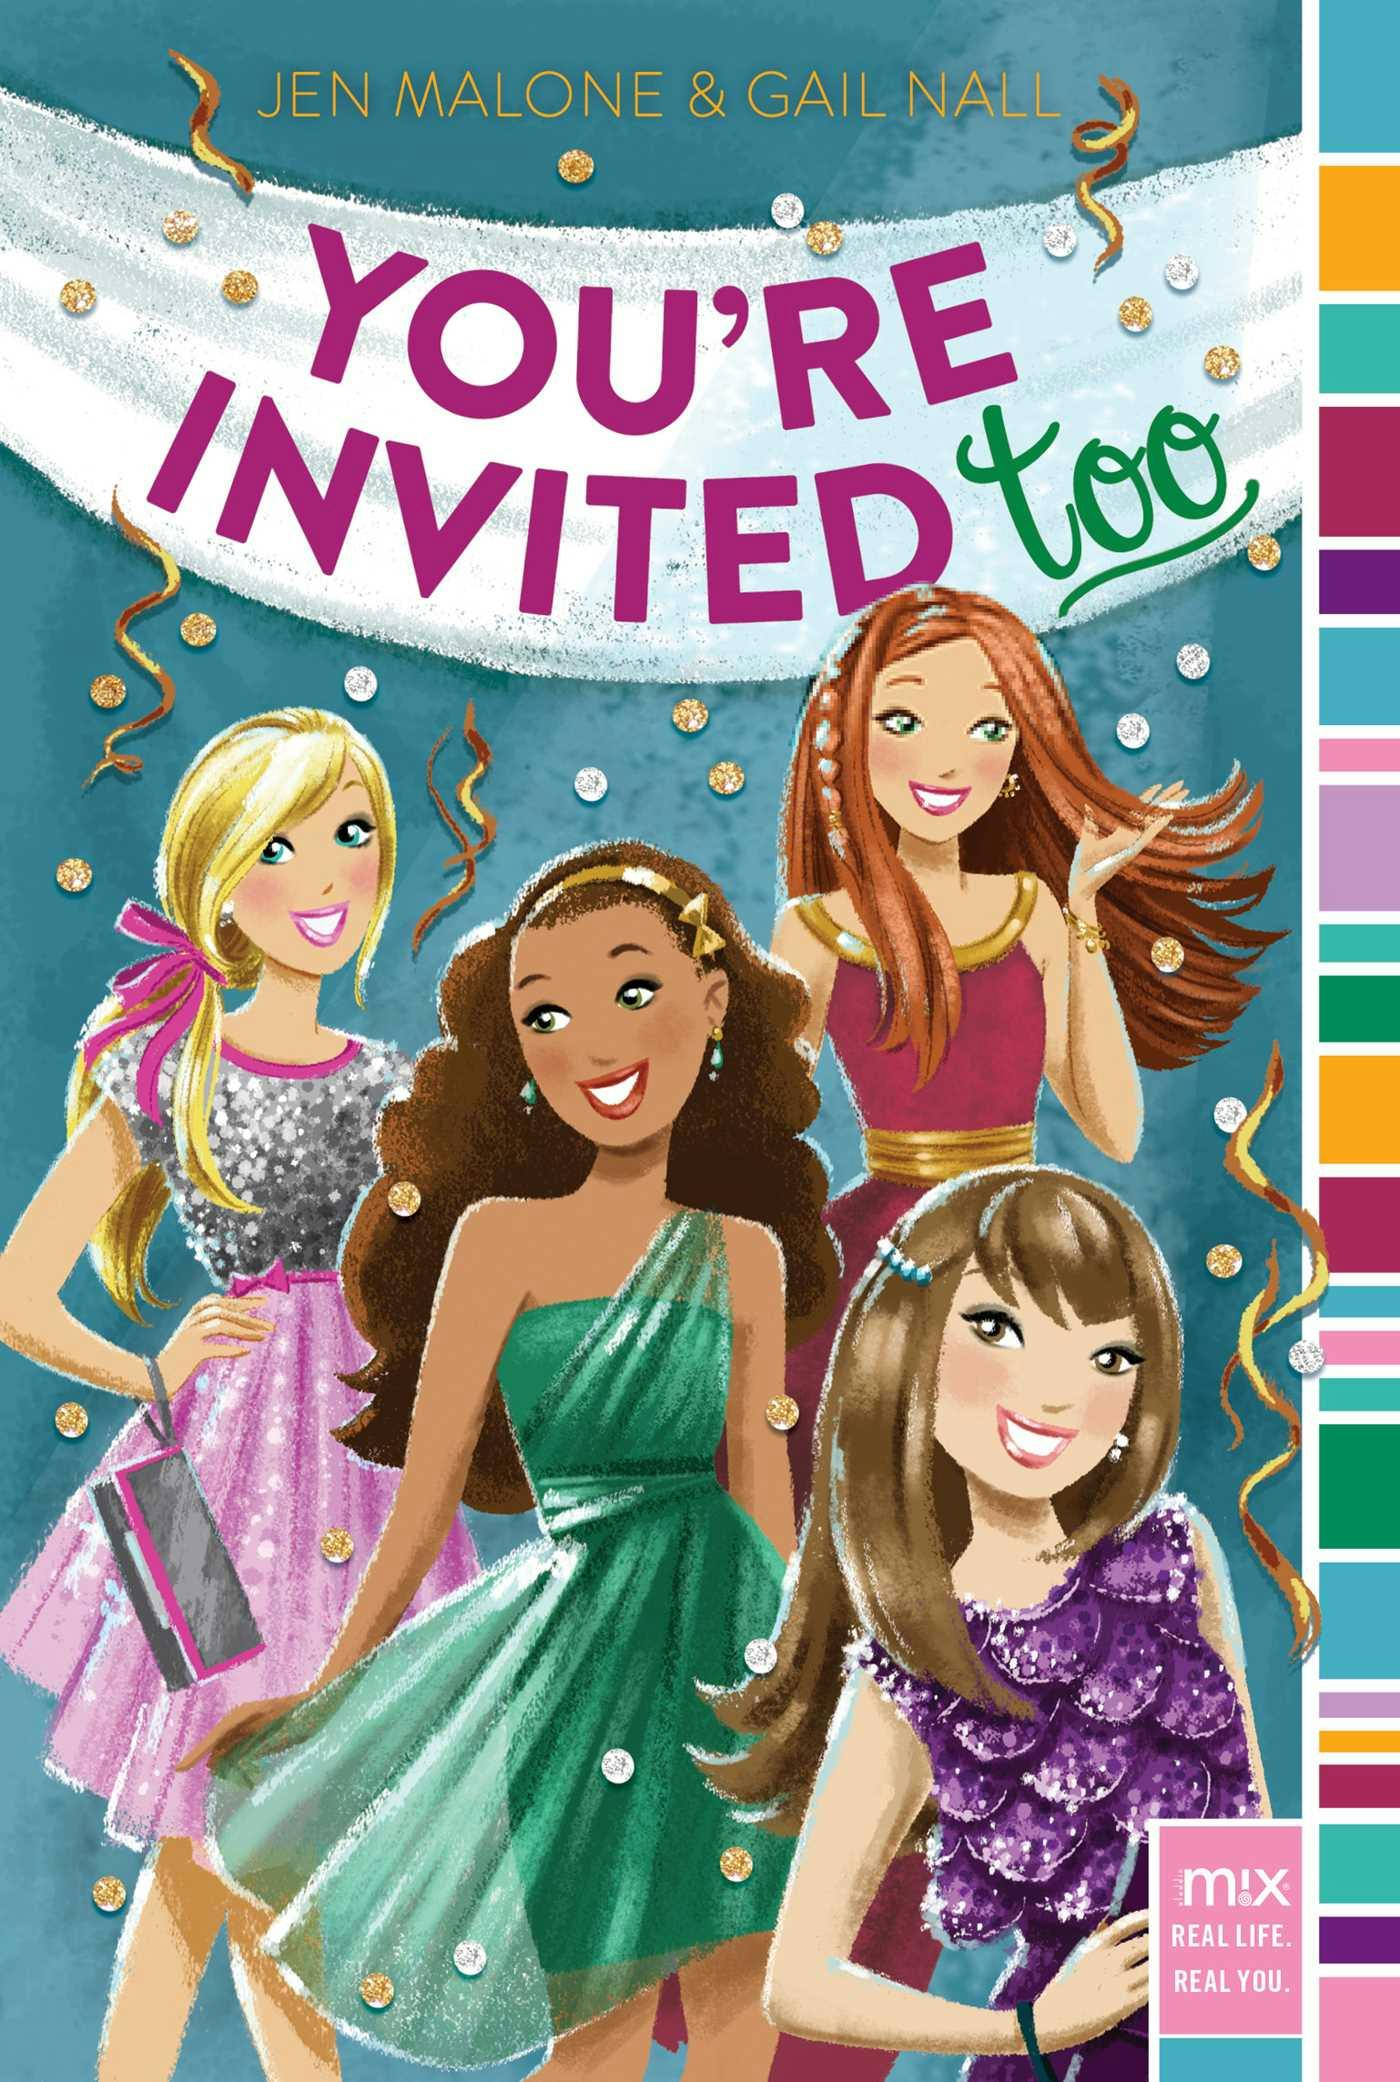 You're Invited Too - Gail Nall, Jen Malone